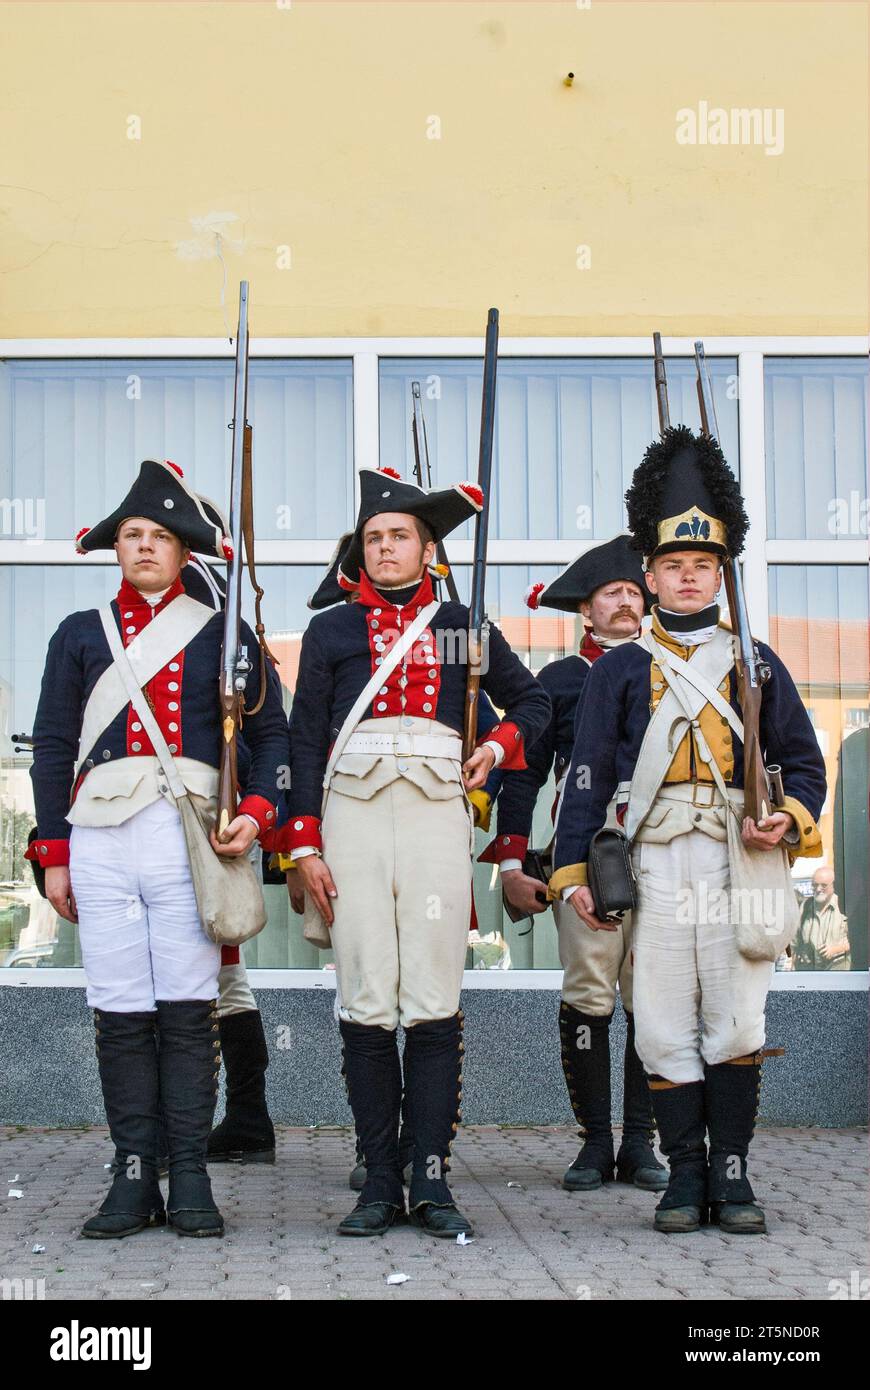 Reenactors in historic uniforms on city streets before Reenactment of the Siege of Neisse during Napoleonic War with Prussia in 1807, in Nysa, Poland Stock Photo